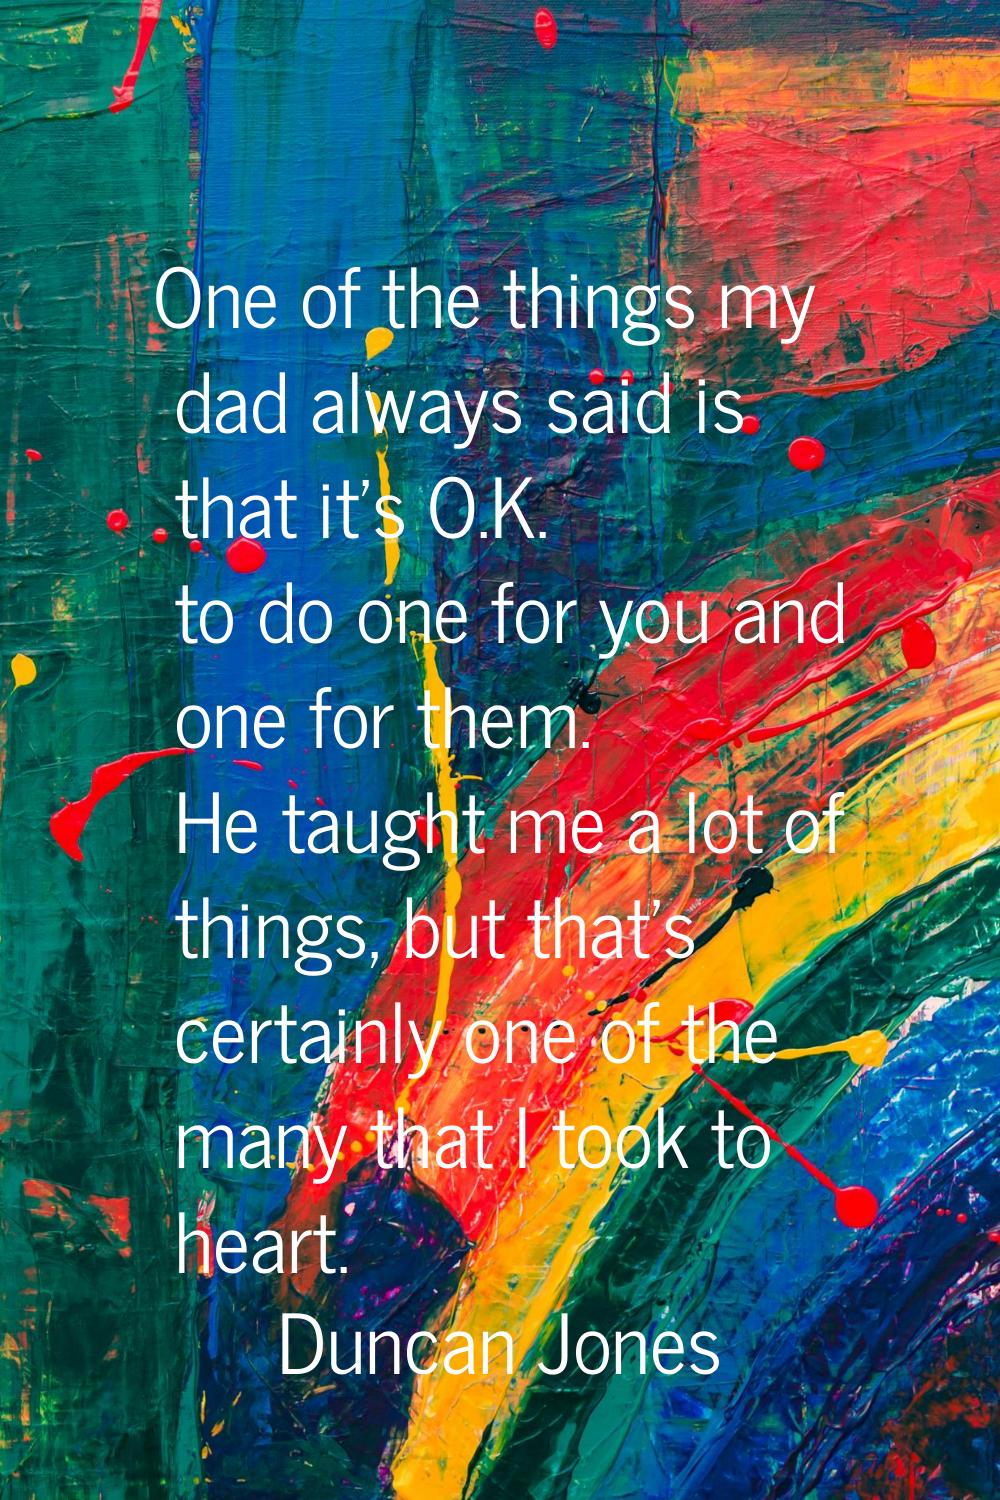 One of the things my dad always said is that it's O.K. to do one for you and one for them. He taugh